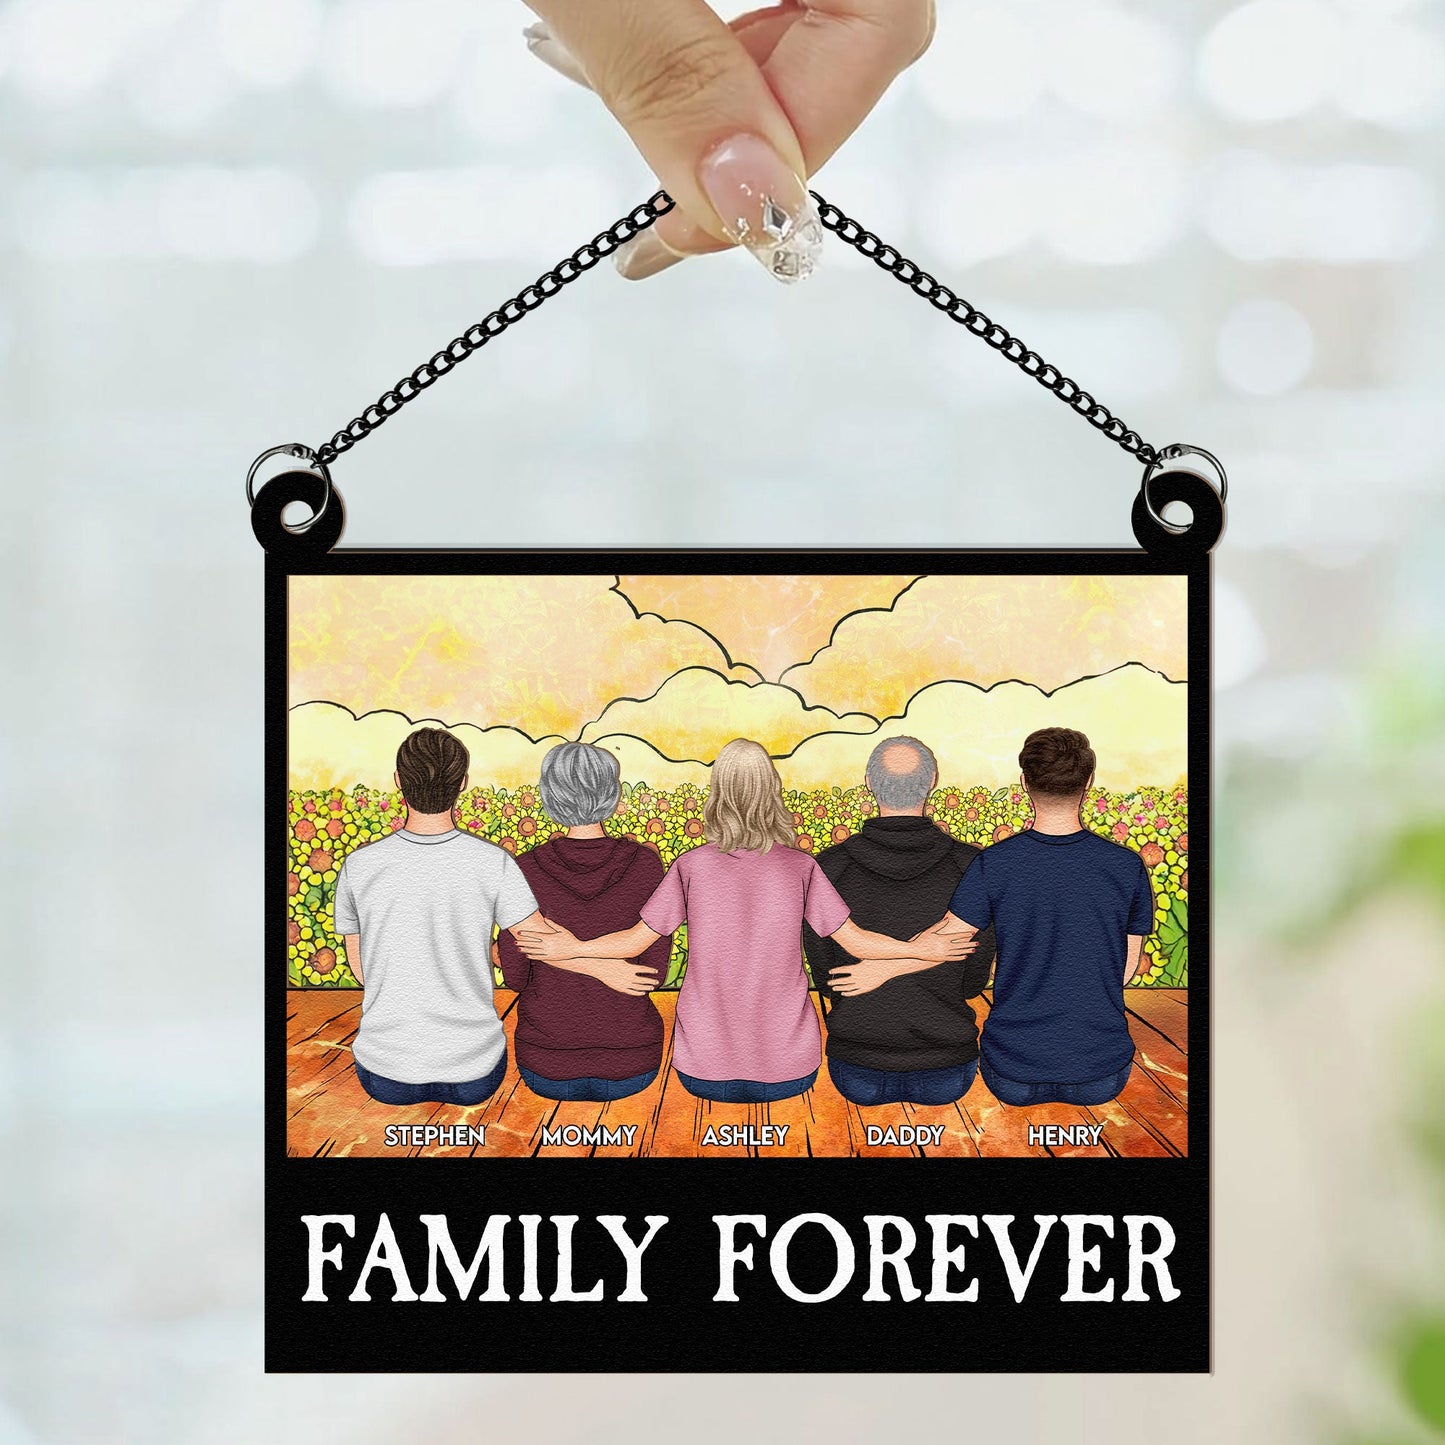 Family Forever - Personalized Window Hanging Suncatcher Ornament